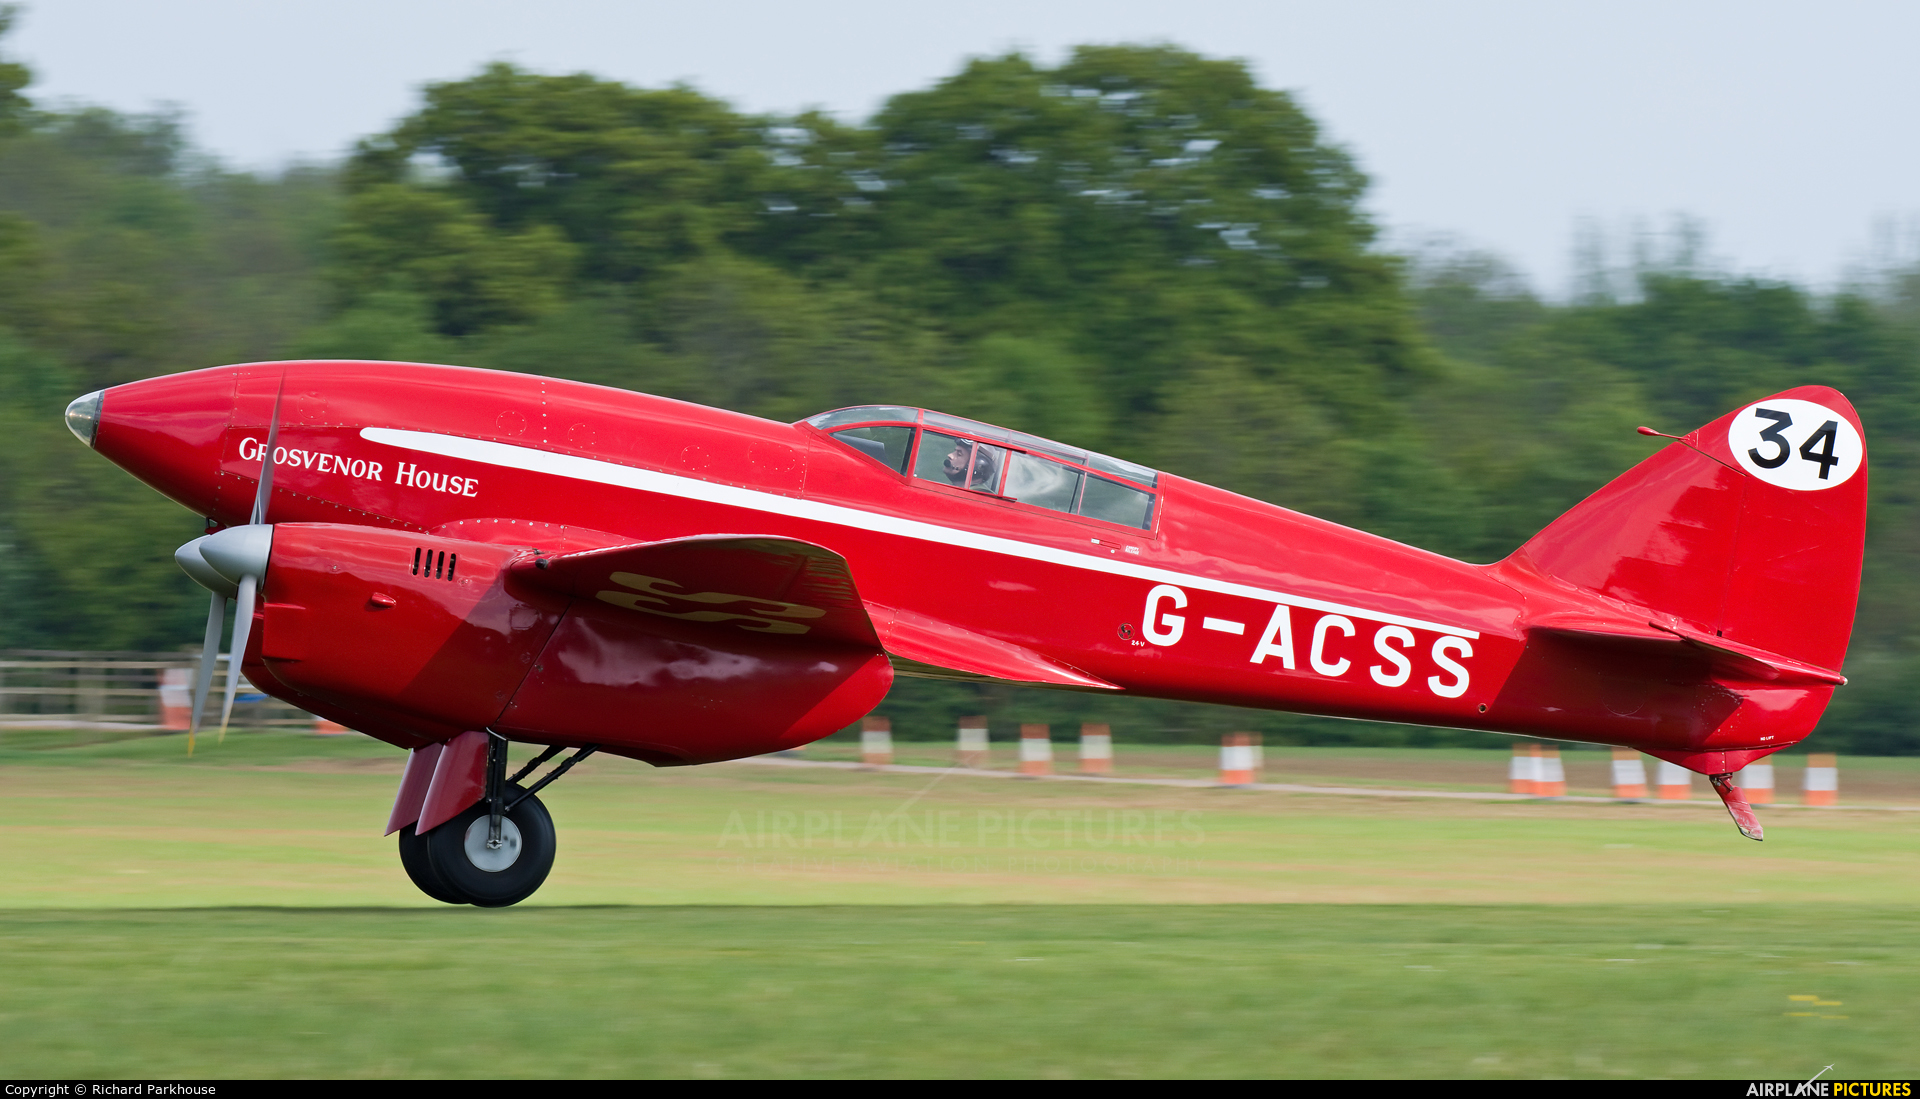 The Shuttleworth Collection G-ACSS aircraft at Old Warden